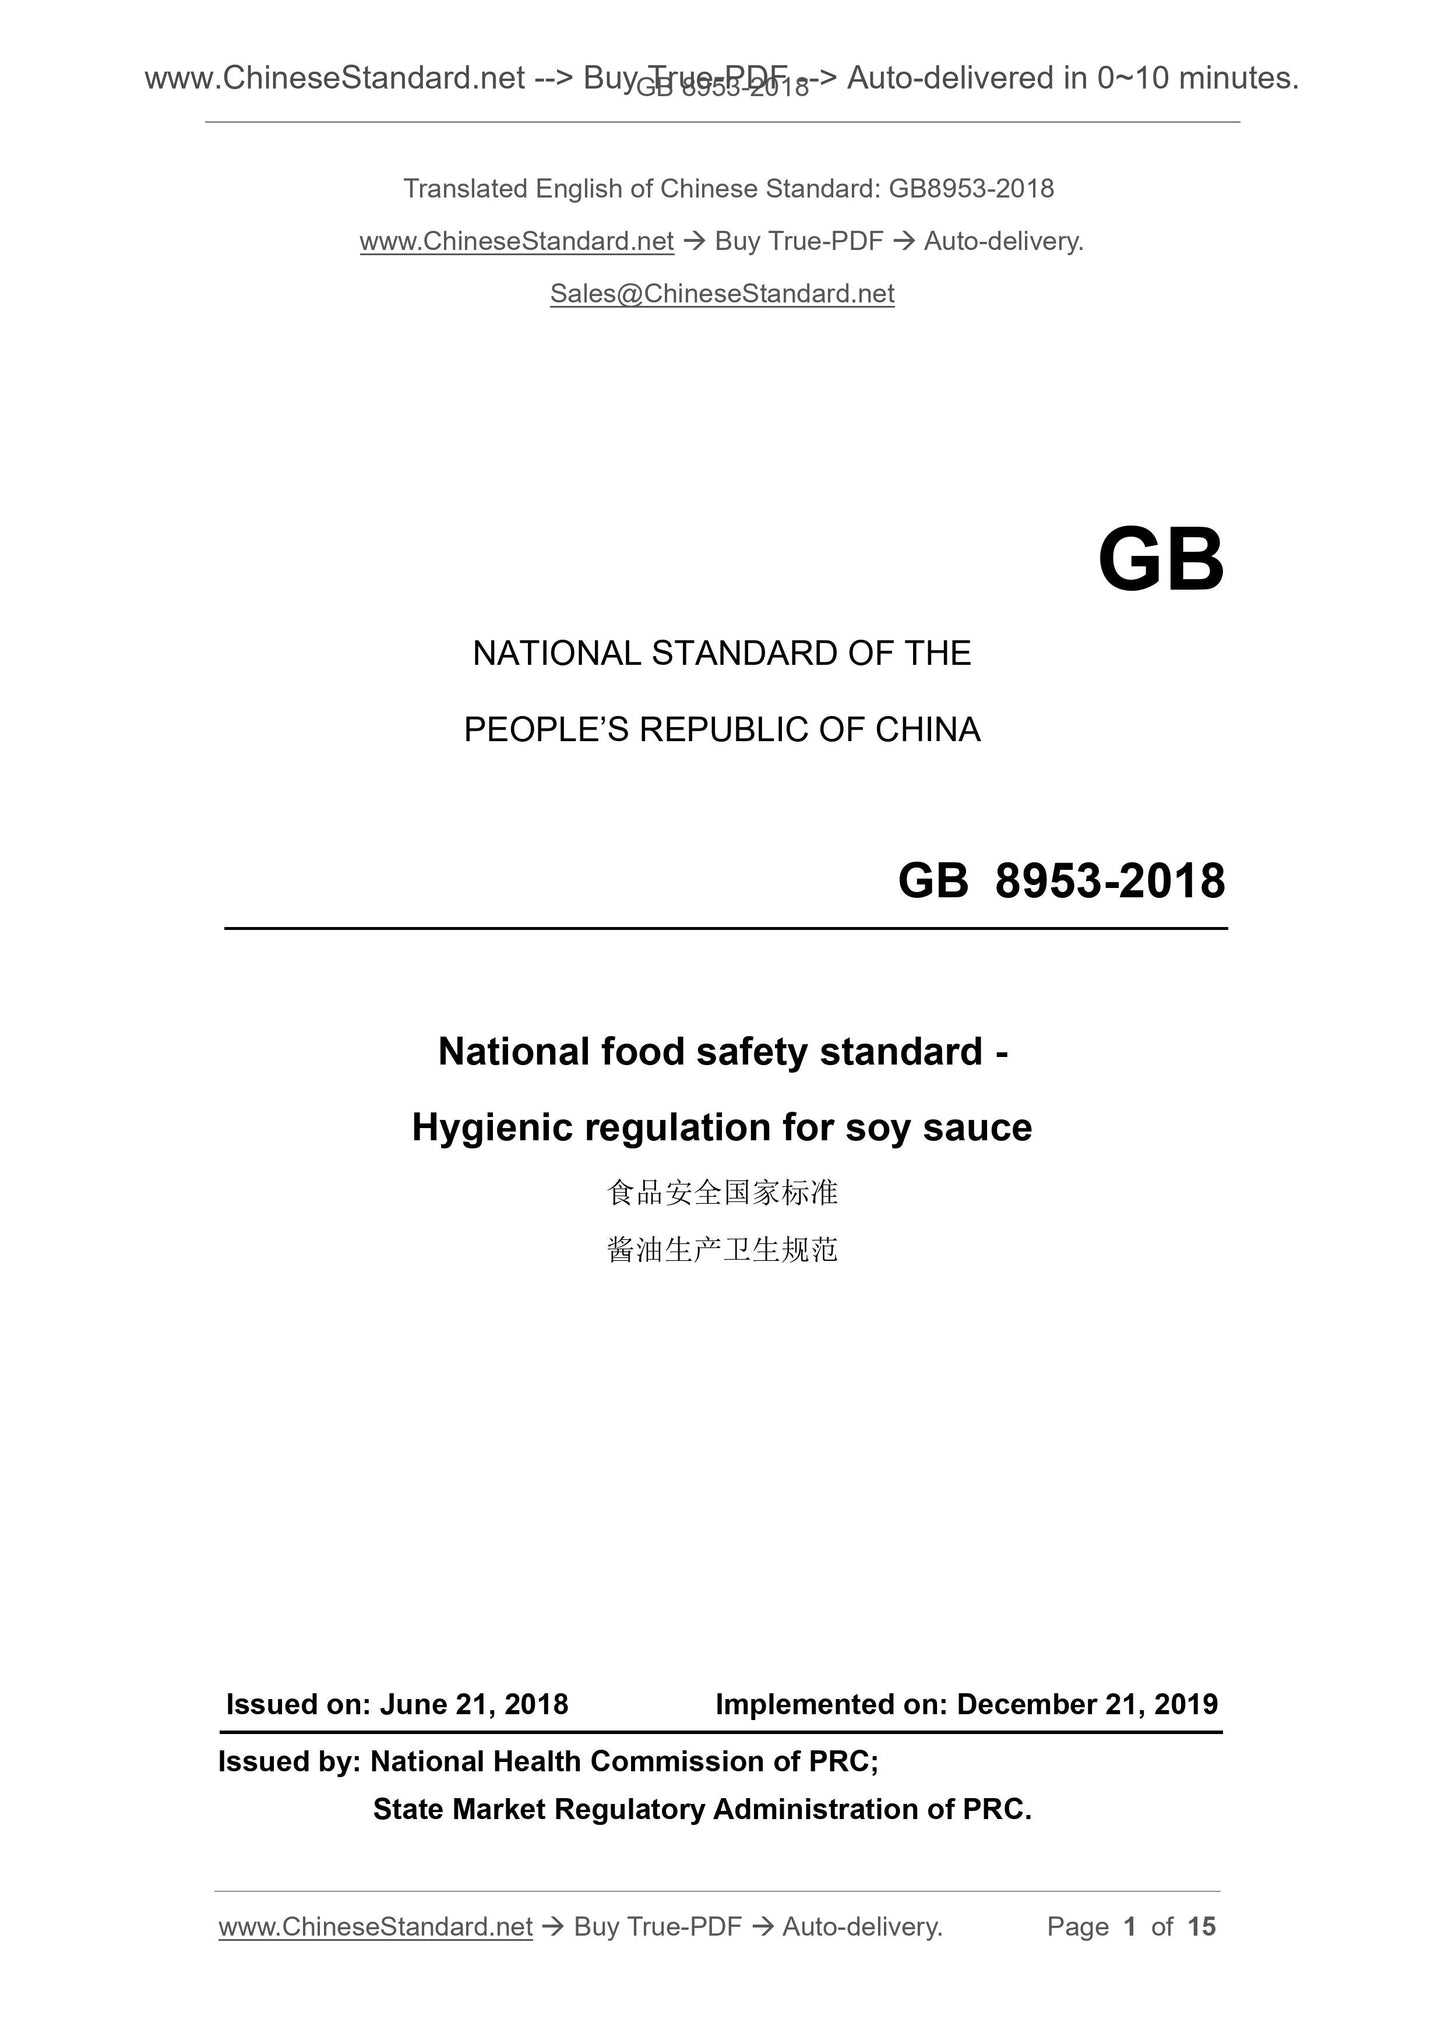 GB 8953-2018 Page 1